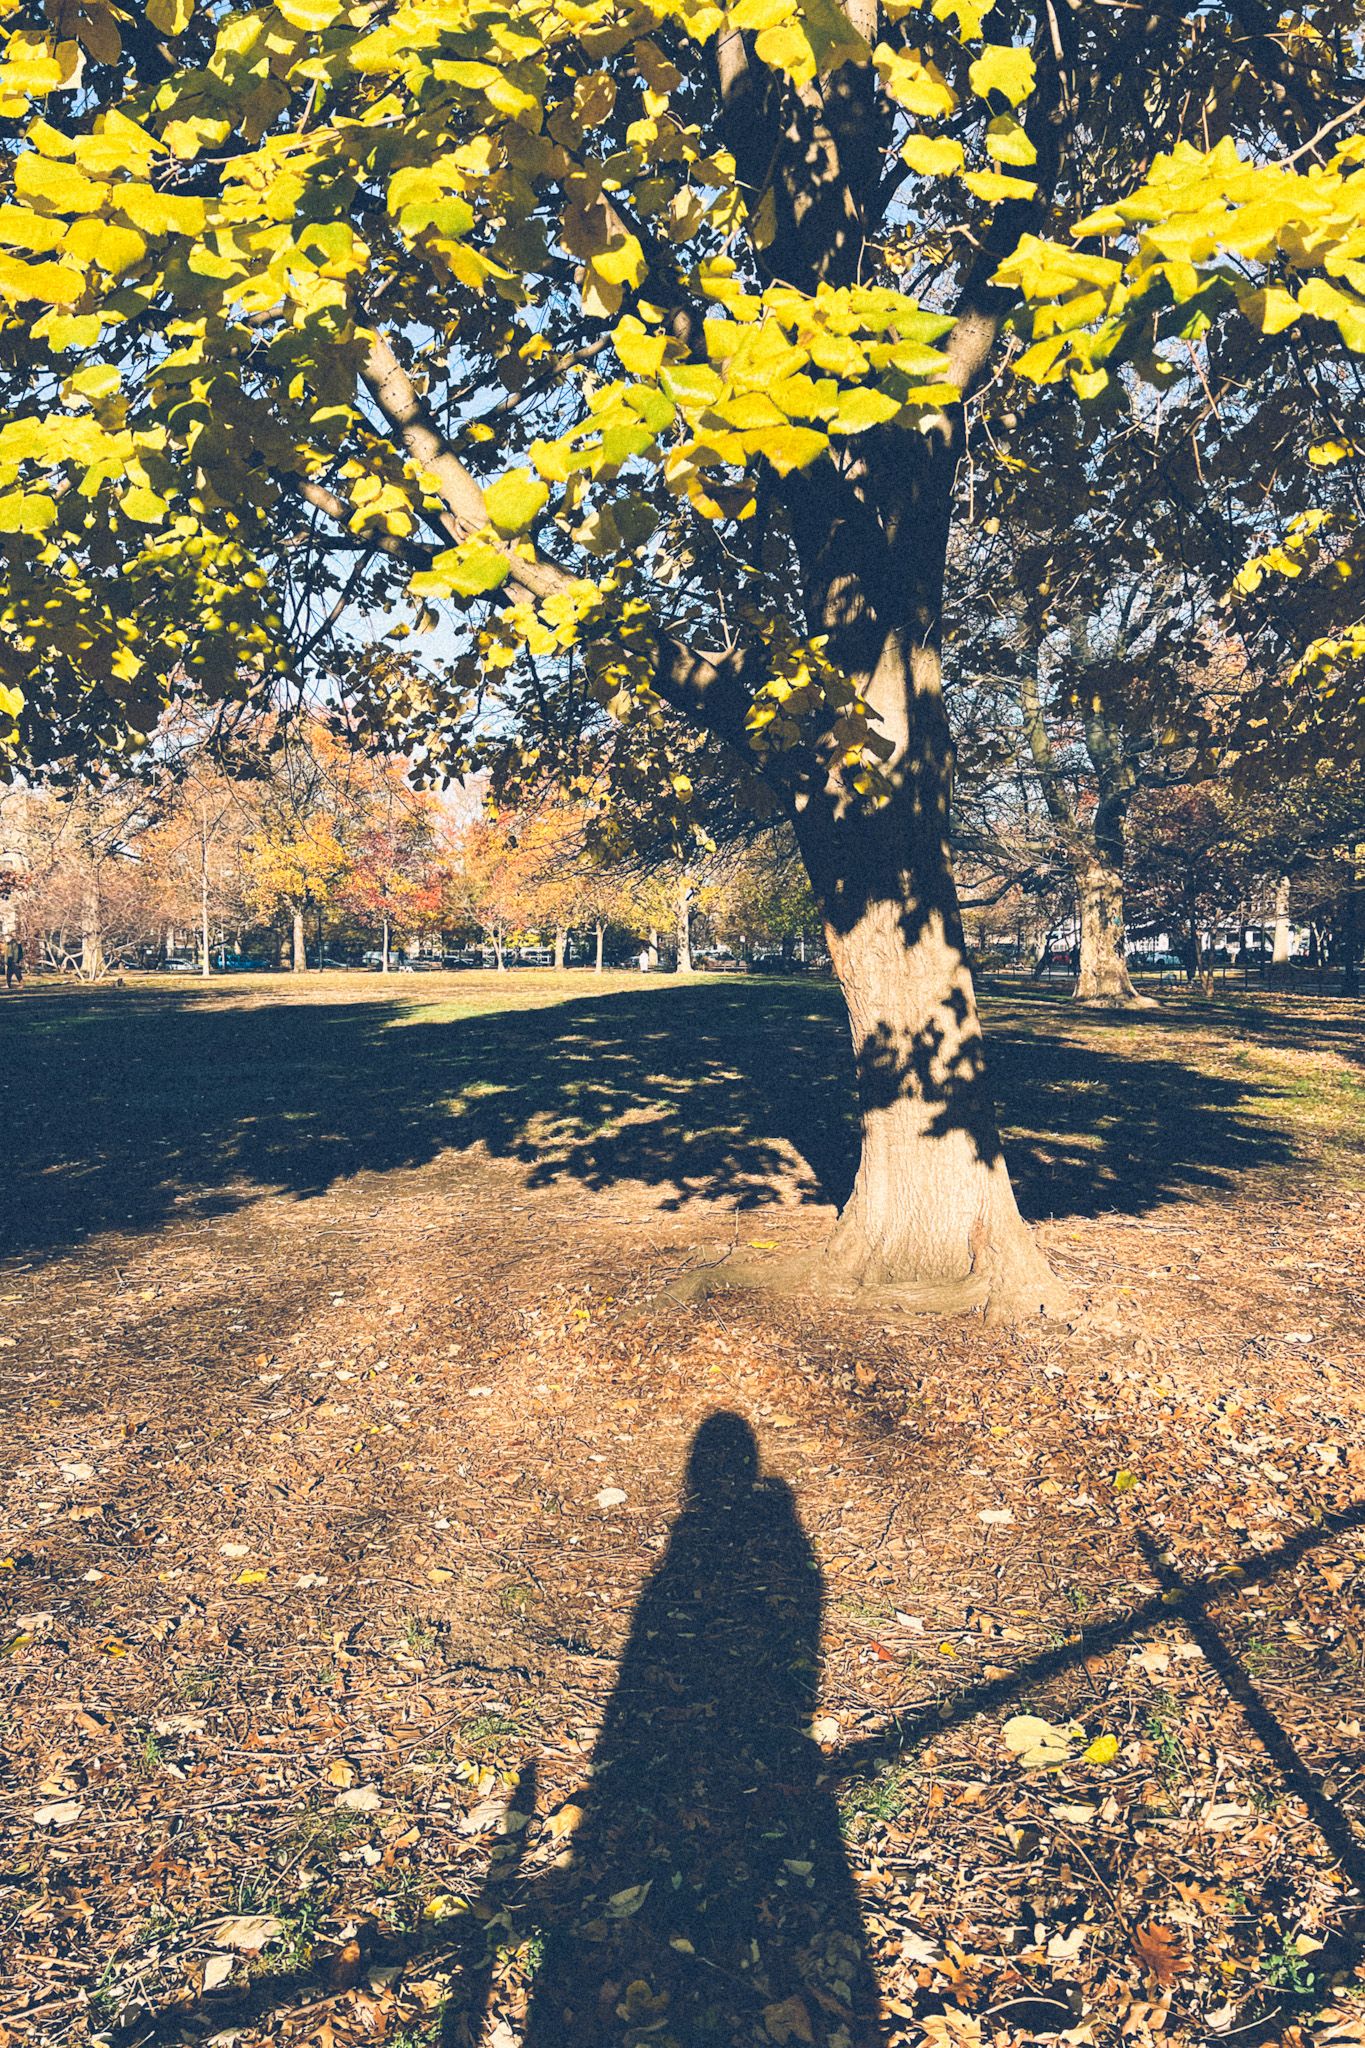 A shadow of the photographer shows in the sunlight on brown leaves in a park.